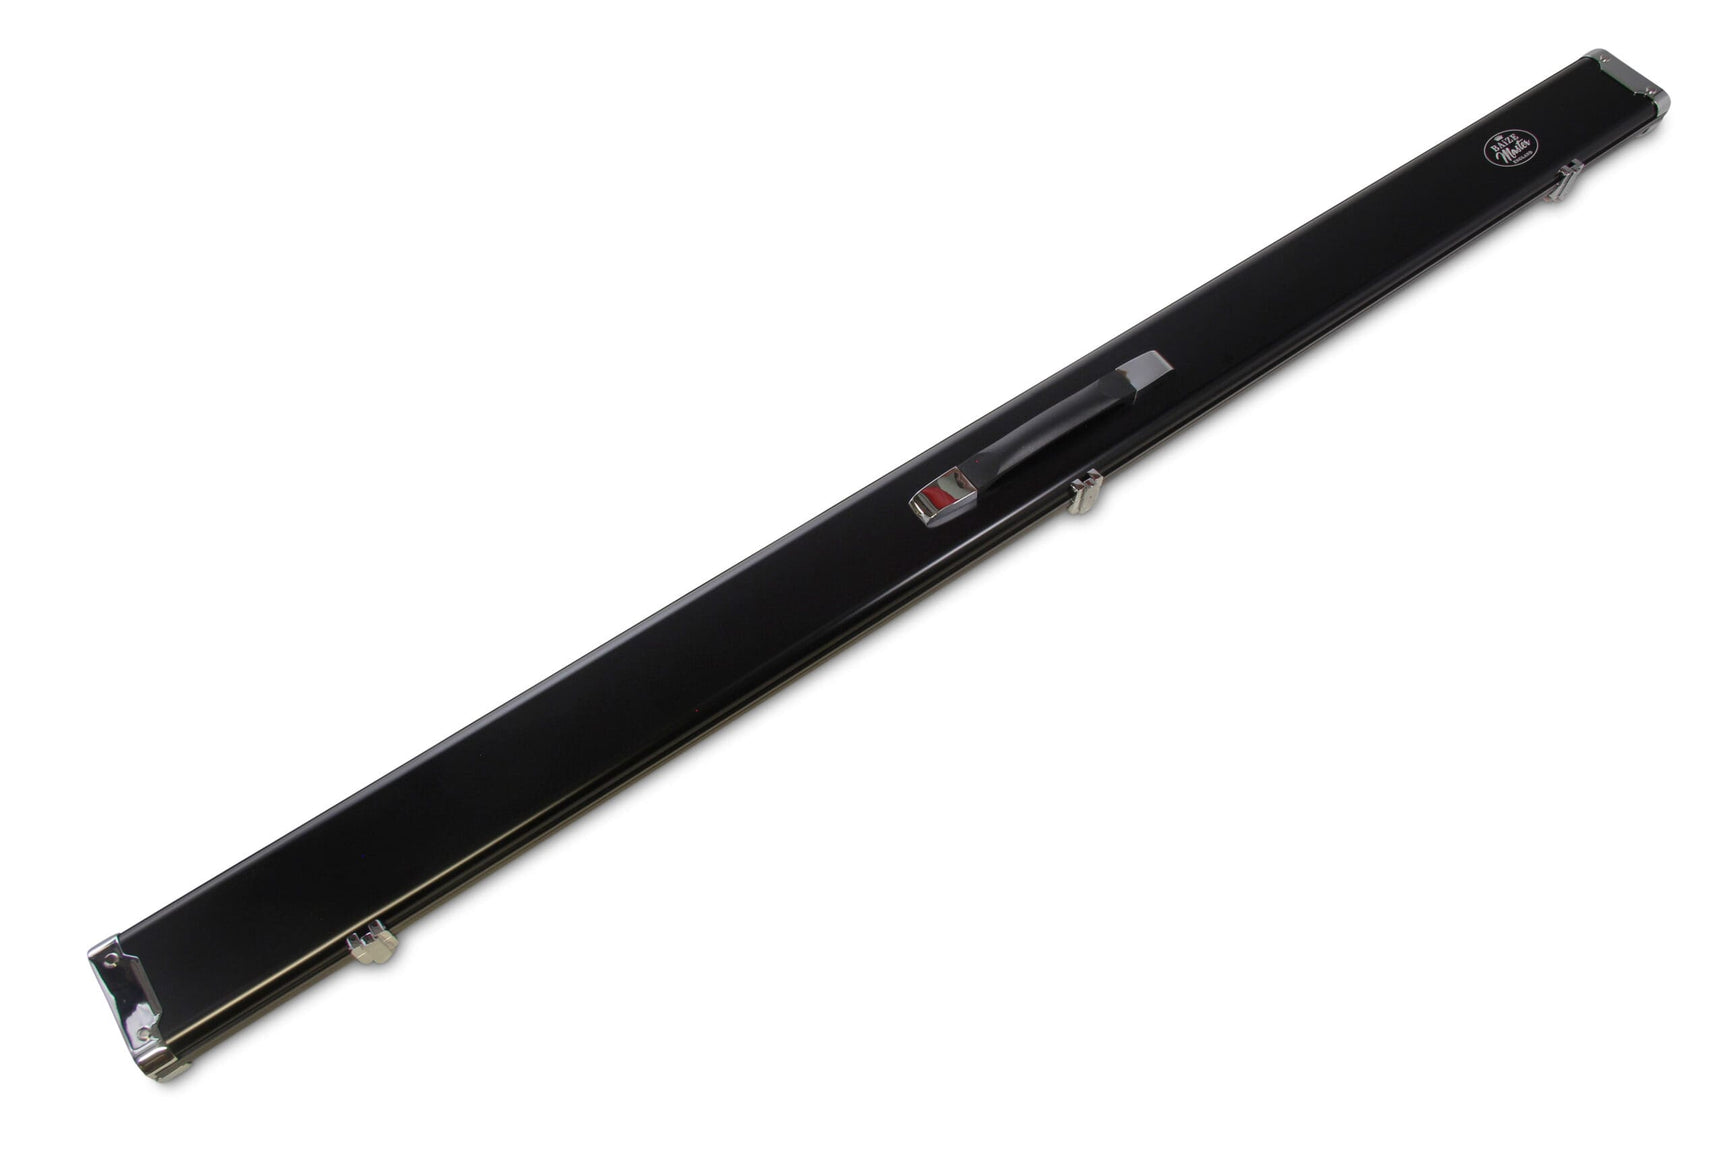 Baize Master PRESTIGE 1 Piece Metal Snooker Pool Cue Case - Holds 2 Cues + Extensions